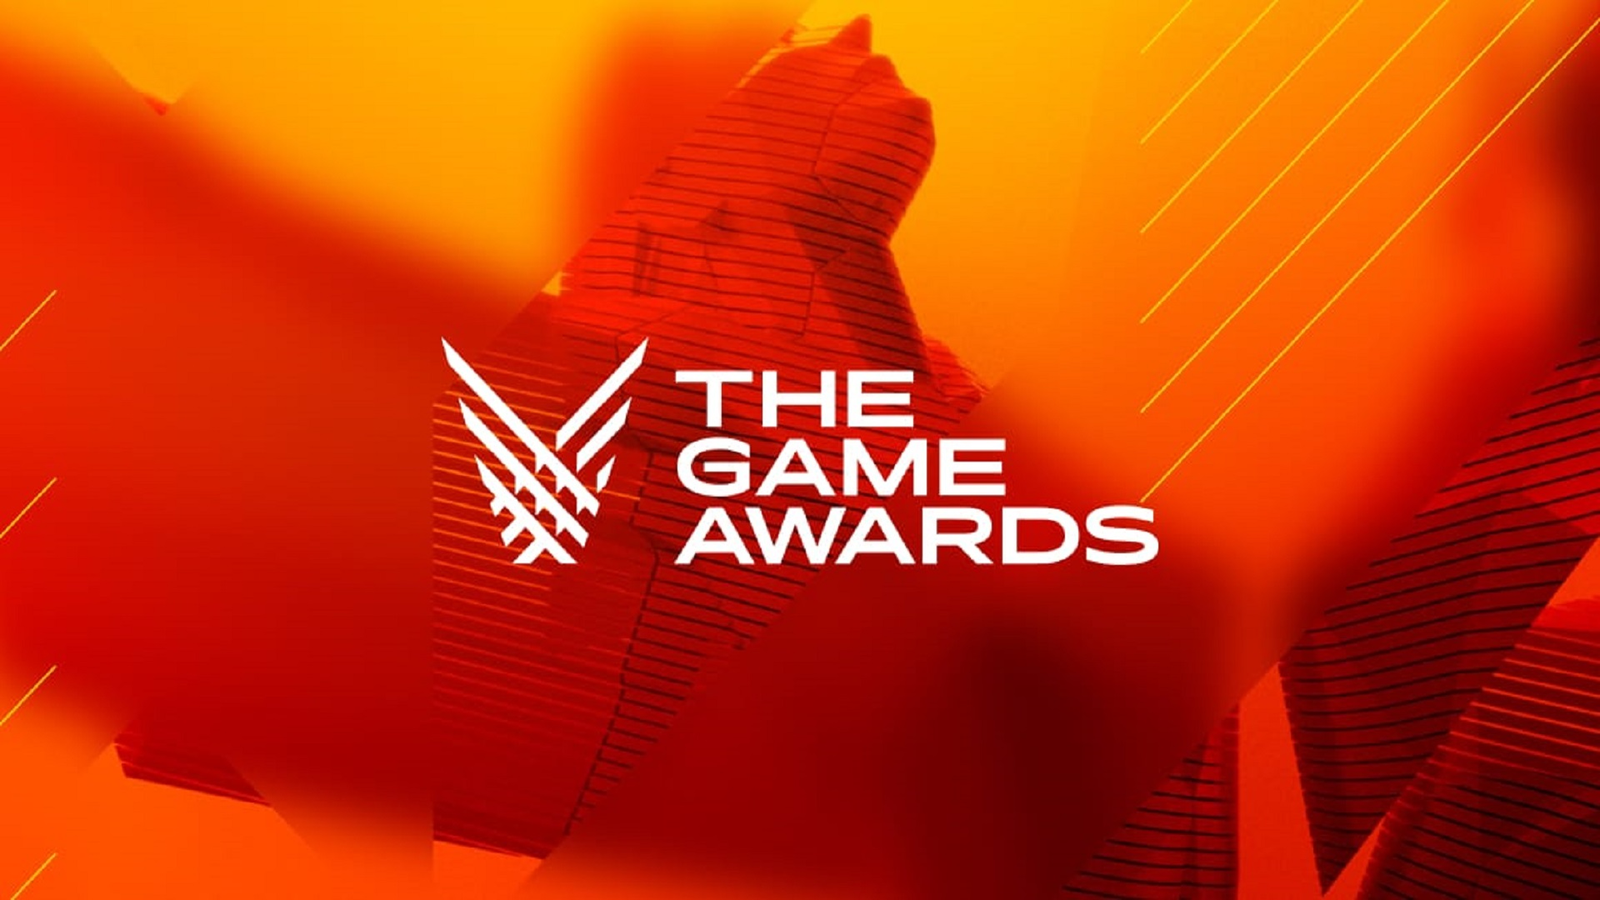 We don't have to be polite about The Game Awards or pretend it